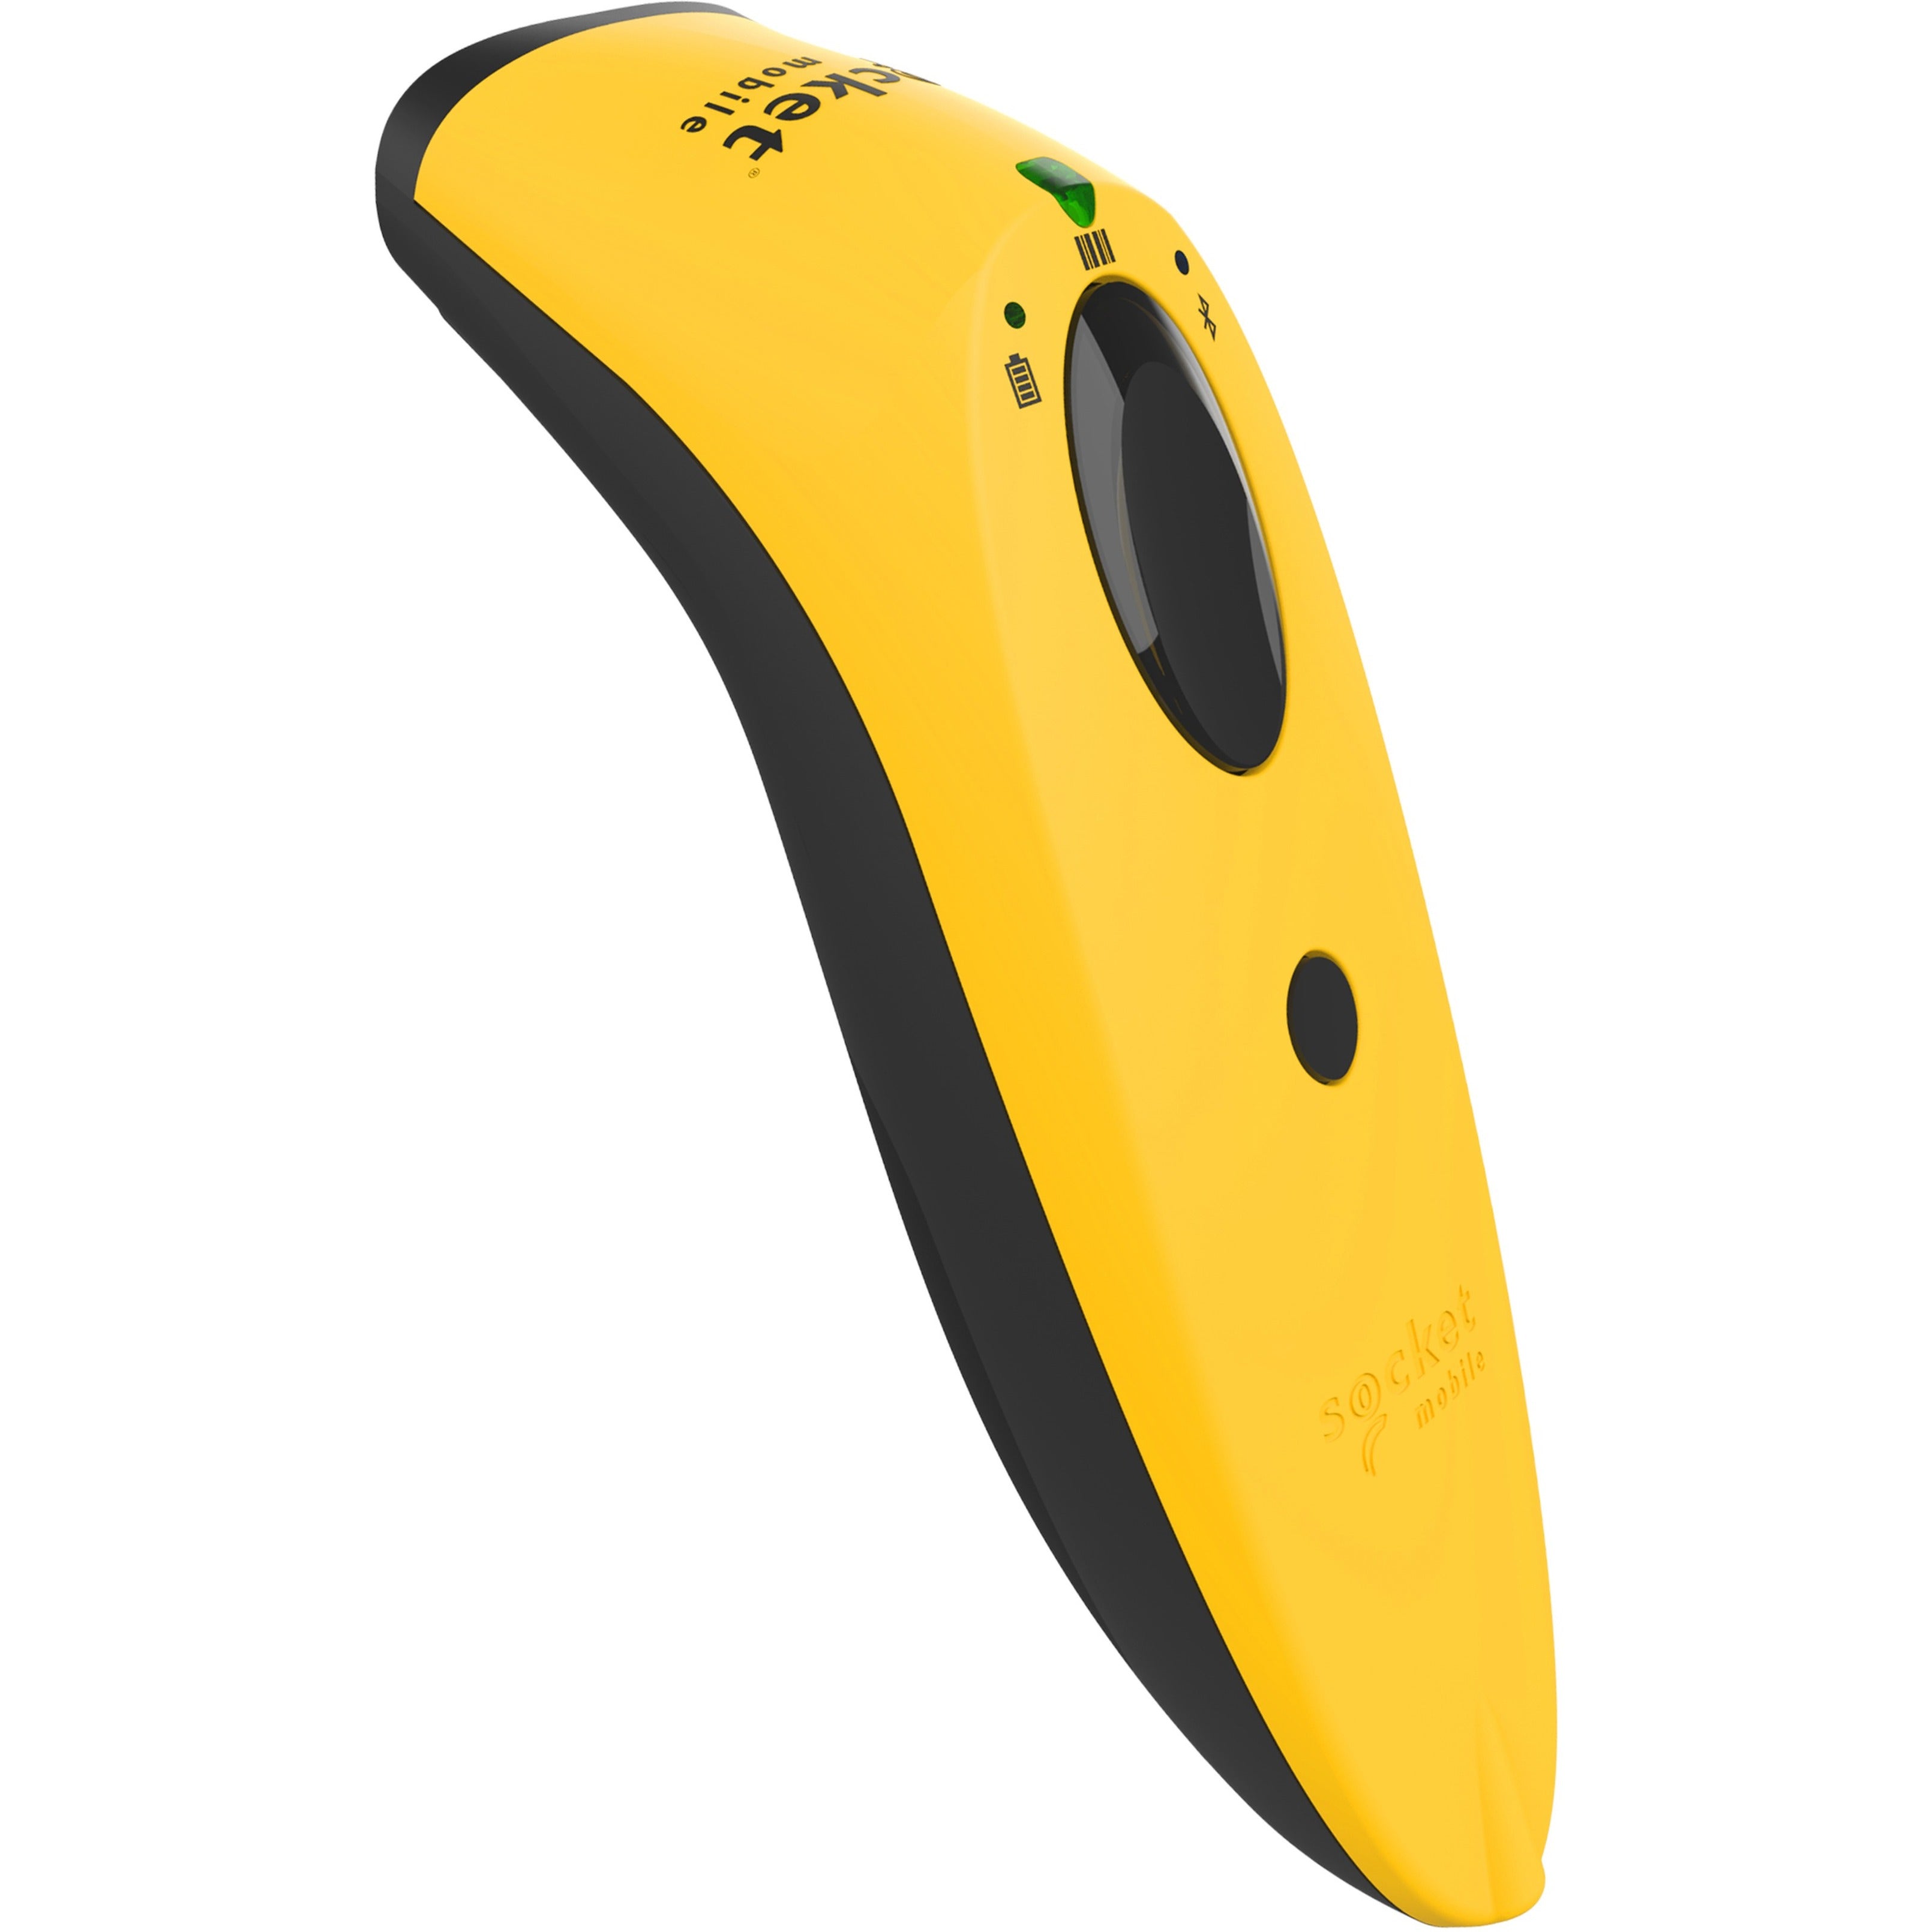 Socket Mobile CX3978-3035 SocketScan S720 Yellow Barcode Plus QR Code Reader, Wireless, 2D/1D Scanning, iOS/Android/Mac/PC Compatible